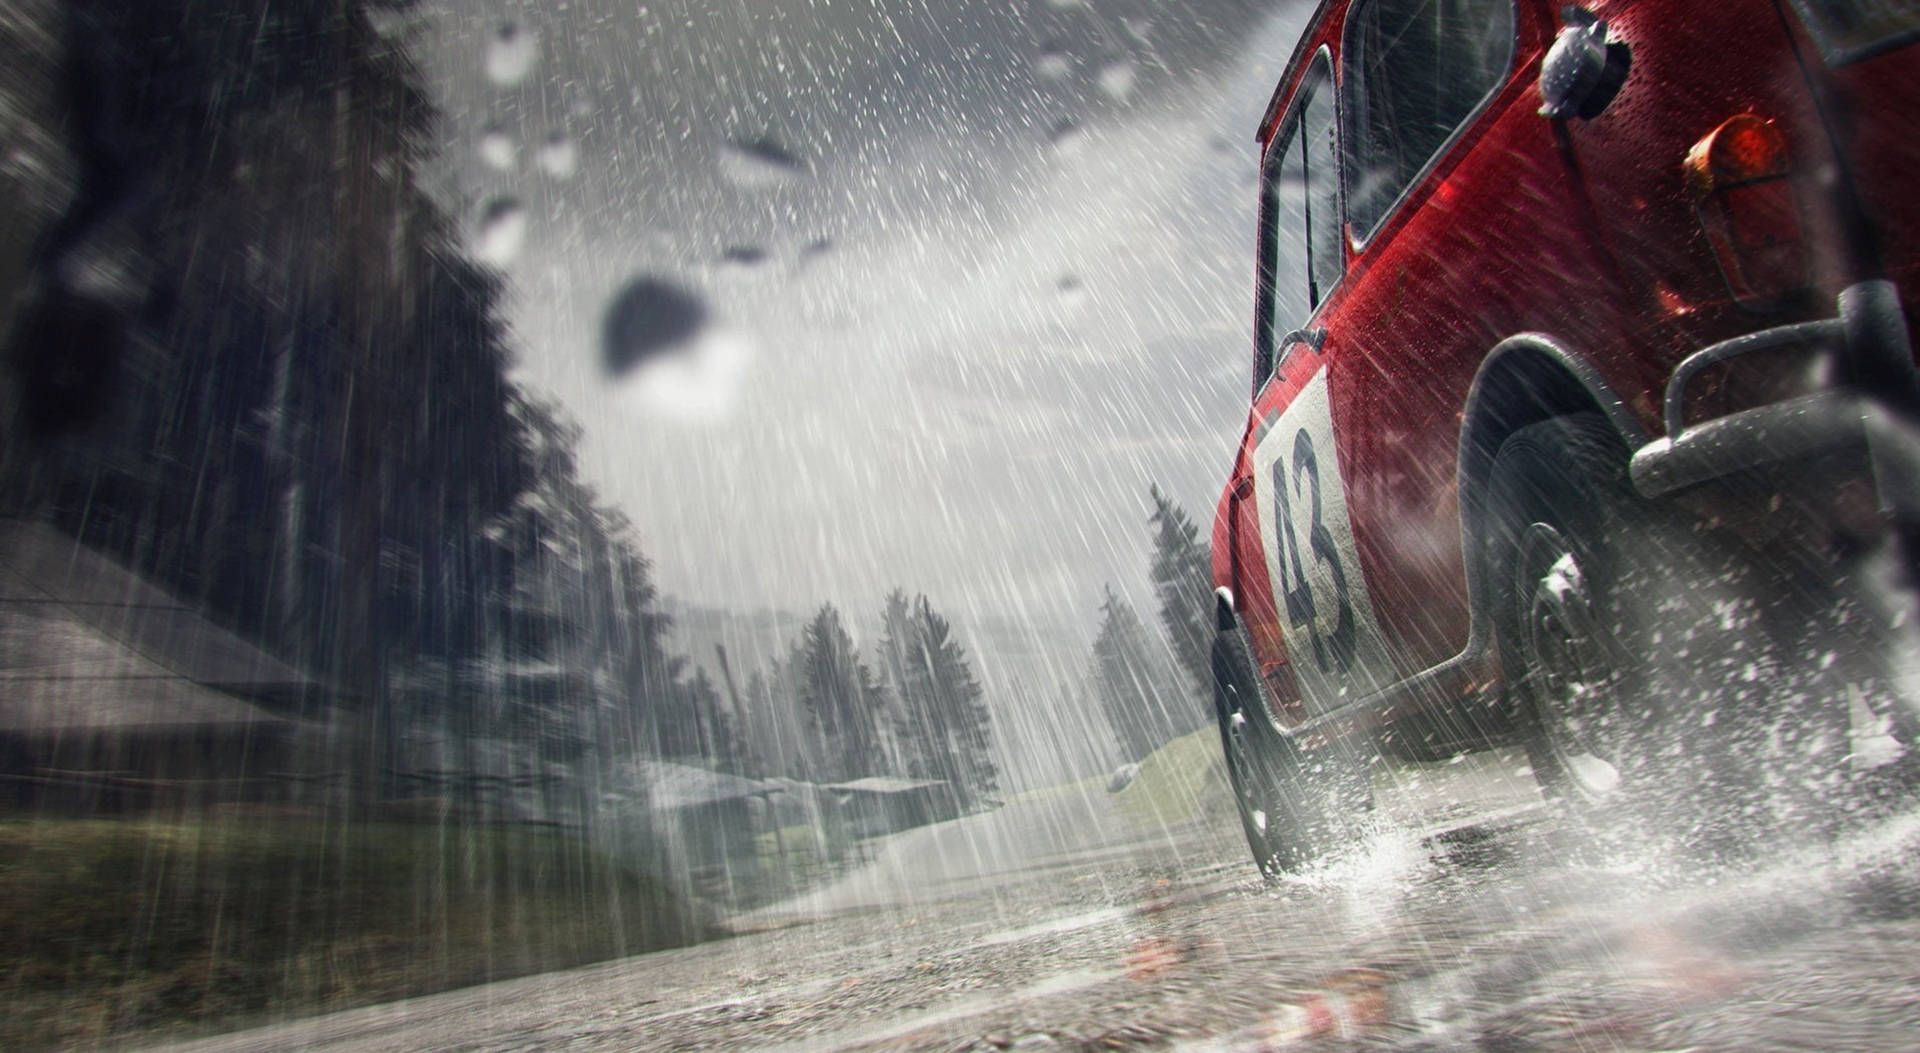 Caption: High-powered Race In Dirt 3 In The Rain